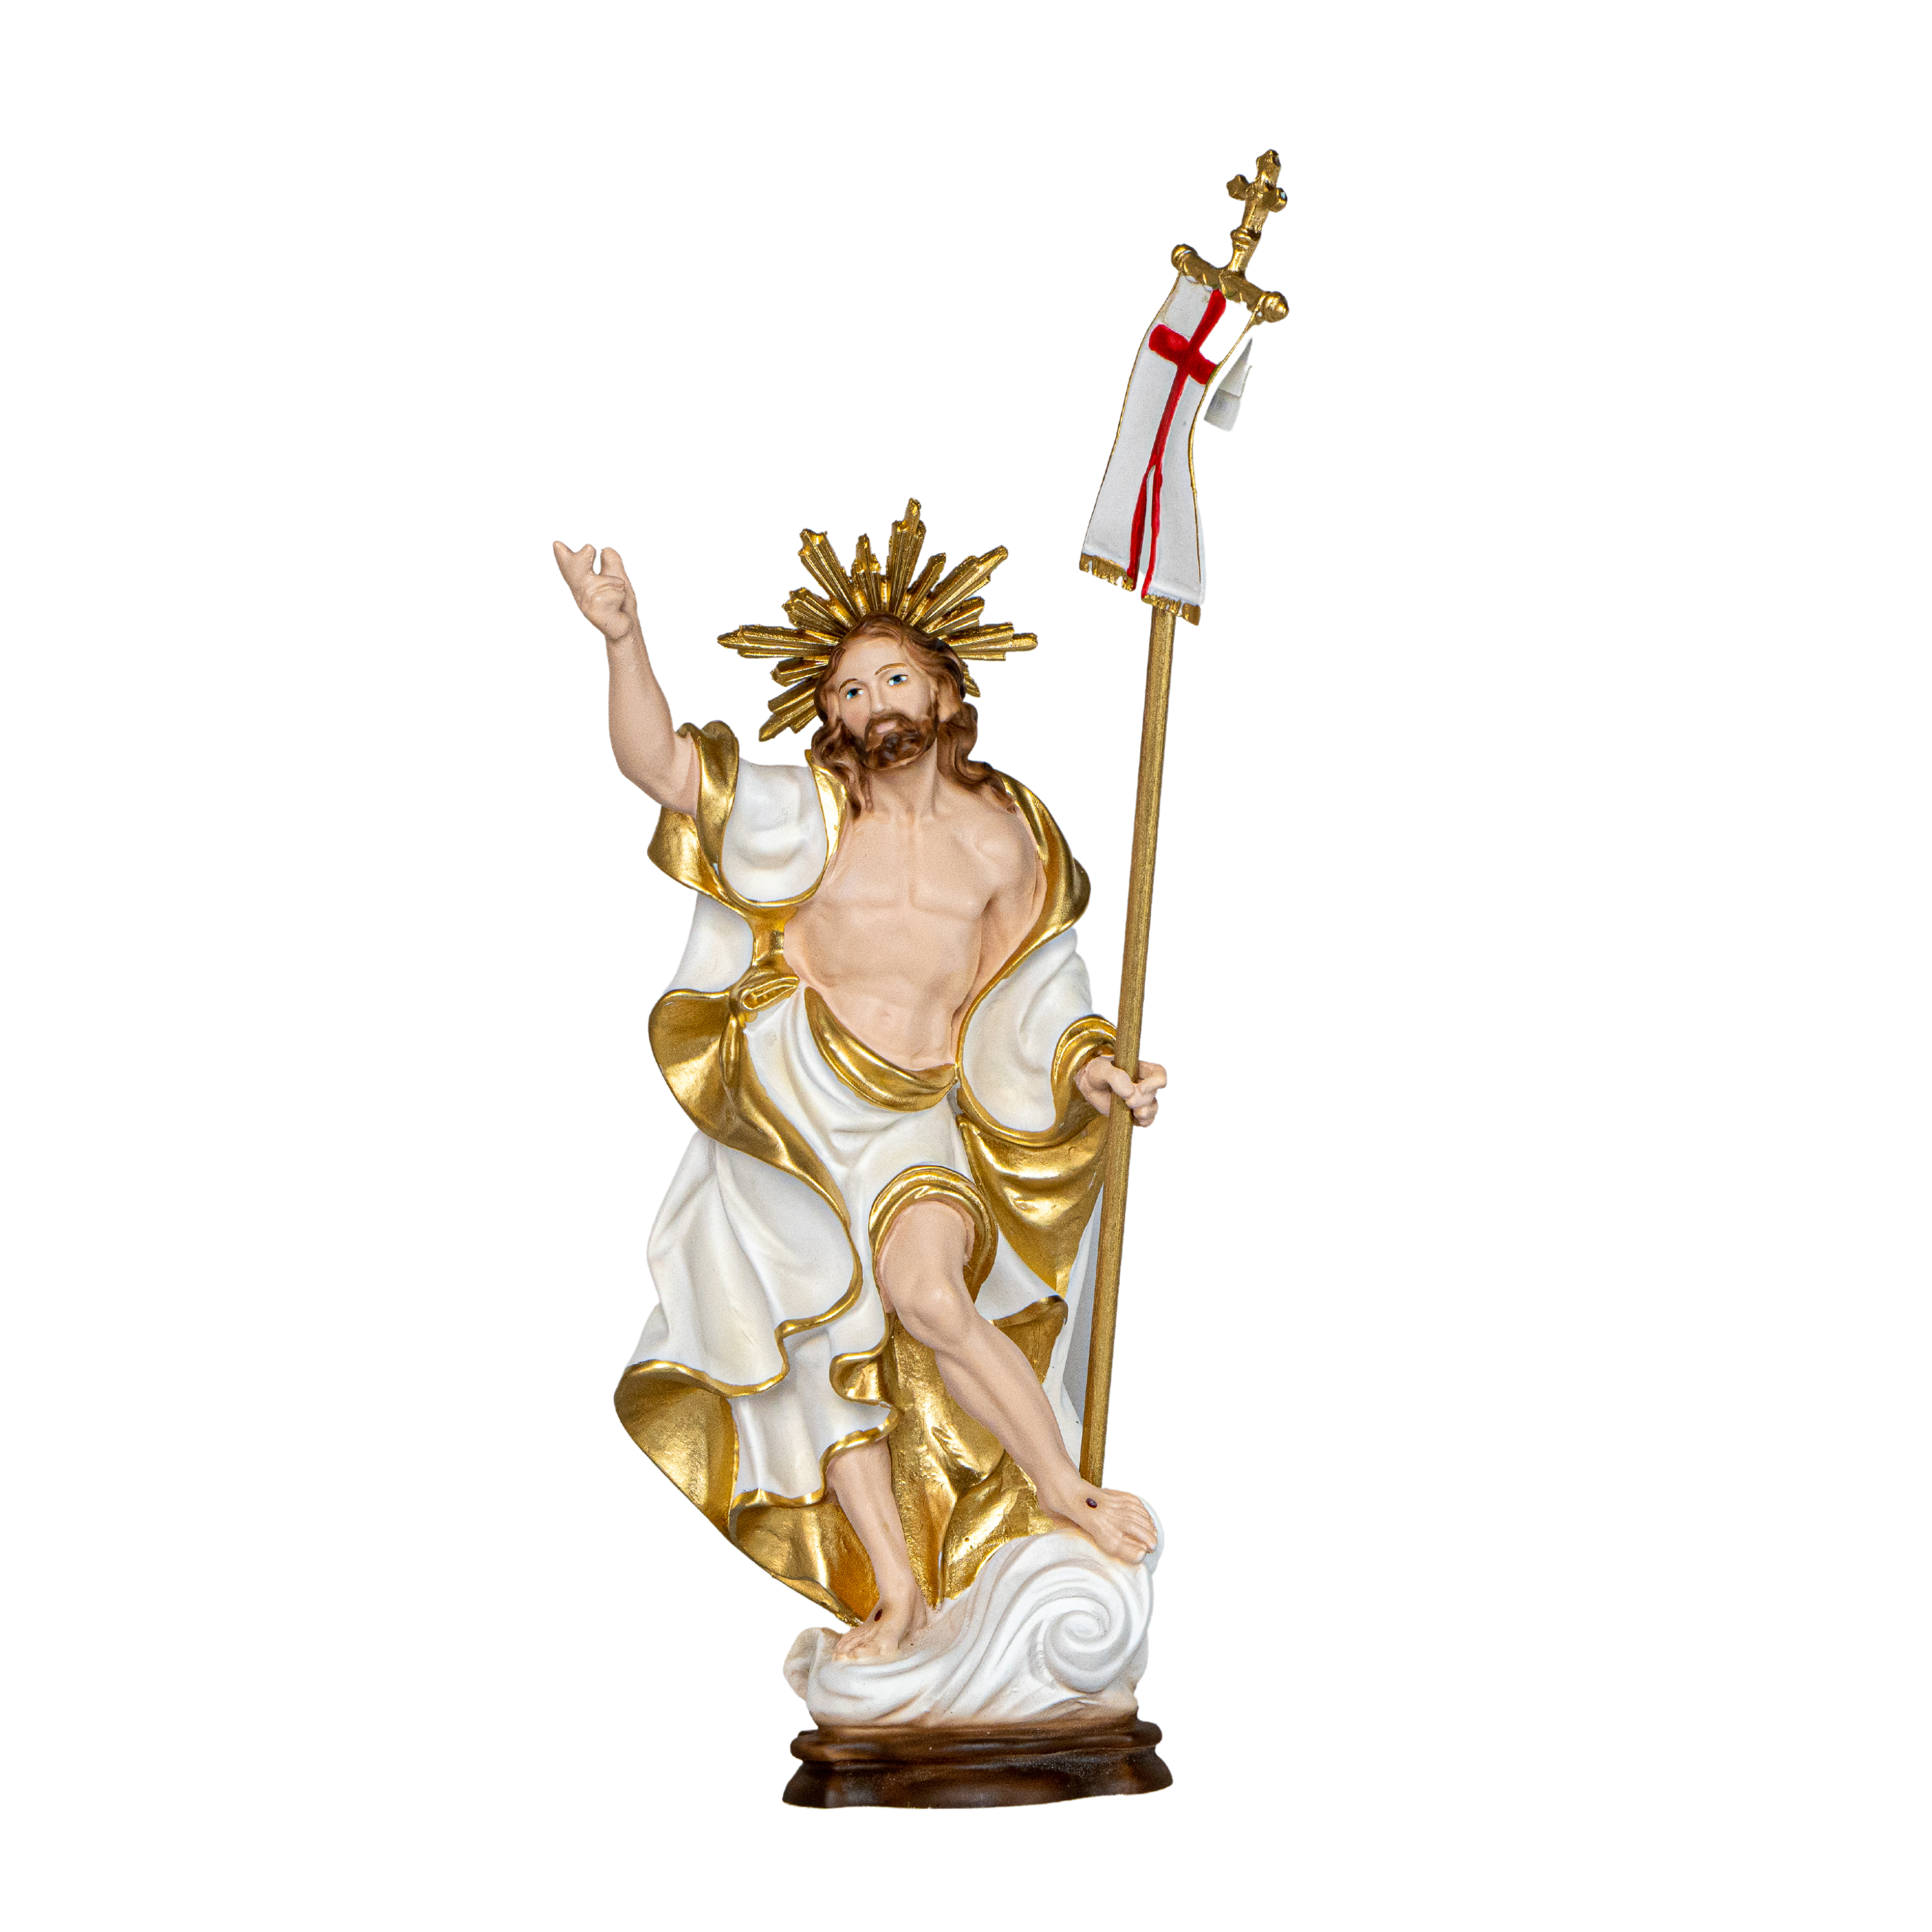 The Faith Gift Shop Risen Christ estatue - Hand Painted in Italy - Our Tuscany Collection -/Cristo Resucitado